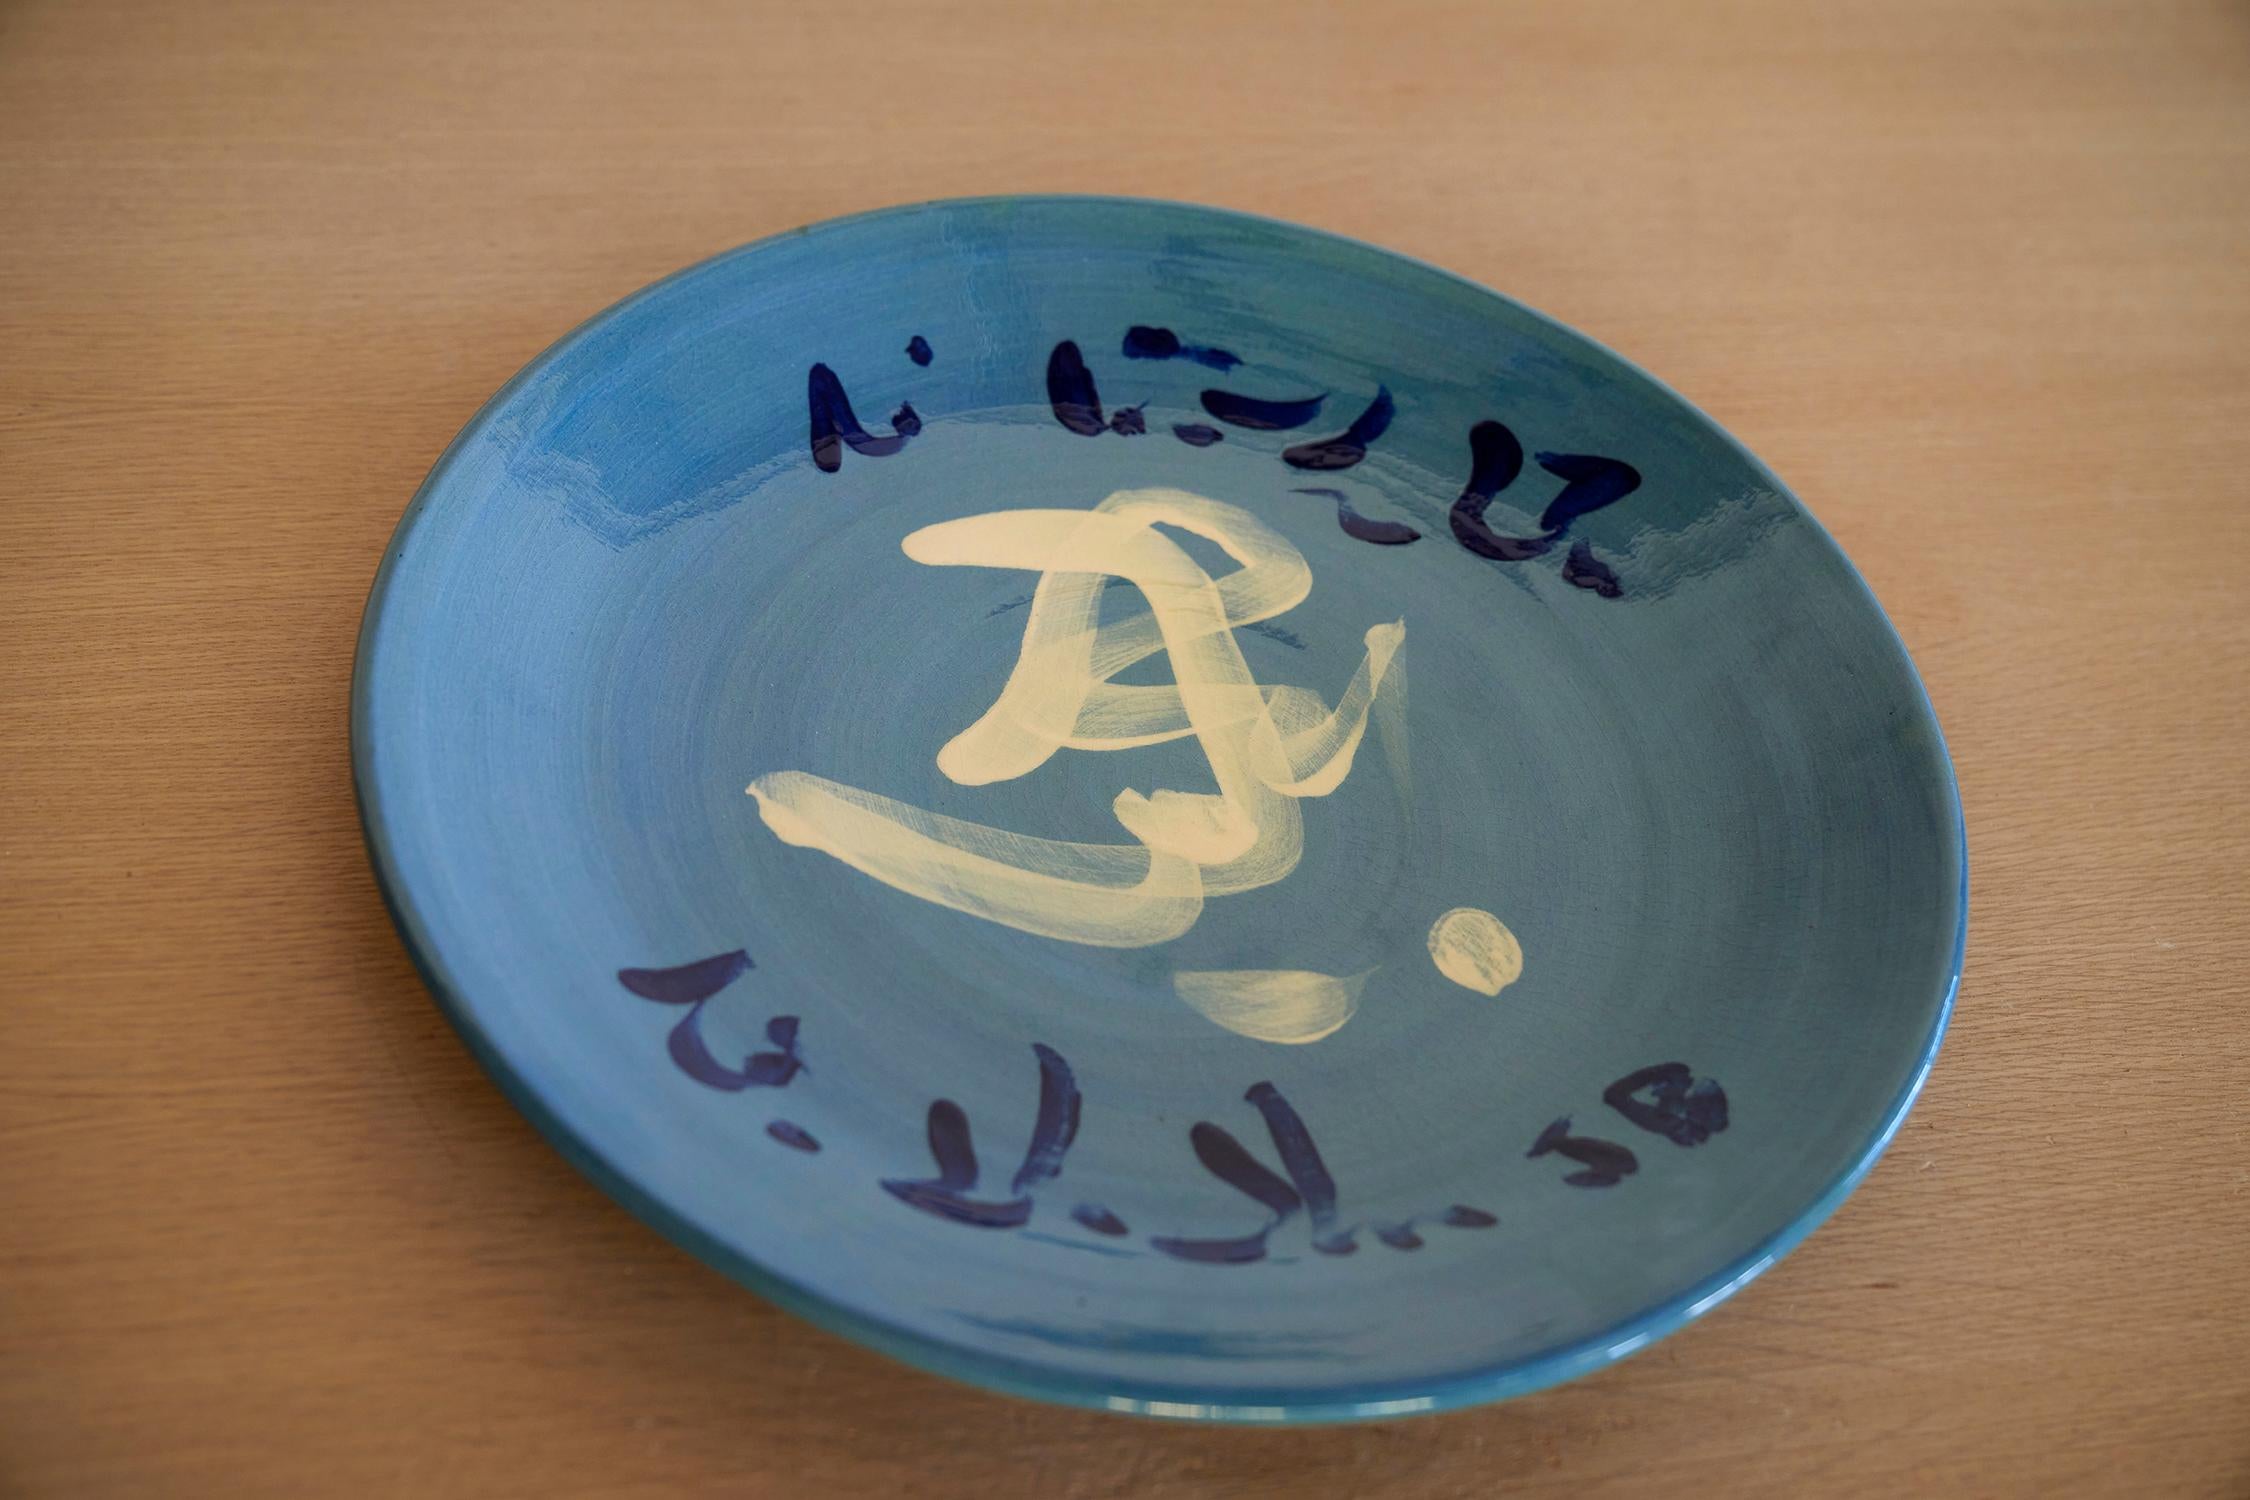 Large Enamel Plate by Jean-Baptiste Van Den Heede
Unique piece
Dimensions: W 40 x D 40 x H 4 cm
Materials: Ceramic.

Large enamel plate, unique piece signed with free calligraphy. It is planned to be able to hang it on the wall.

Jean-Baptiste Van